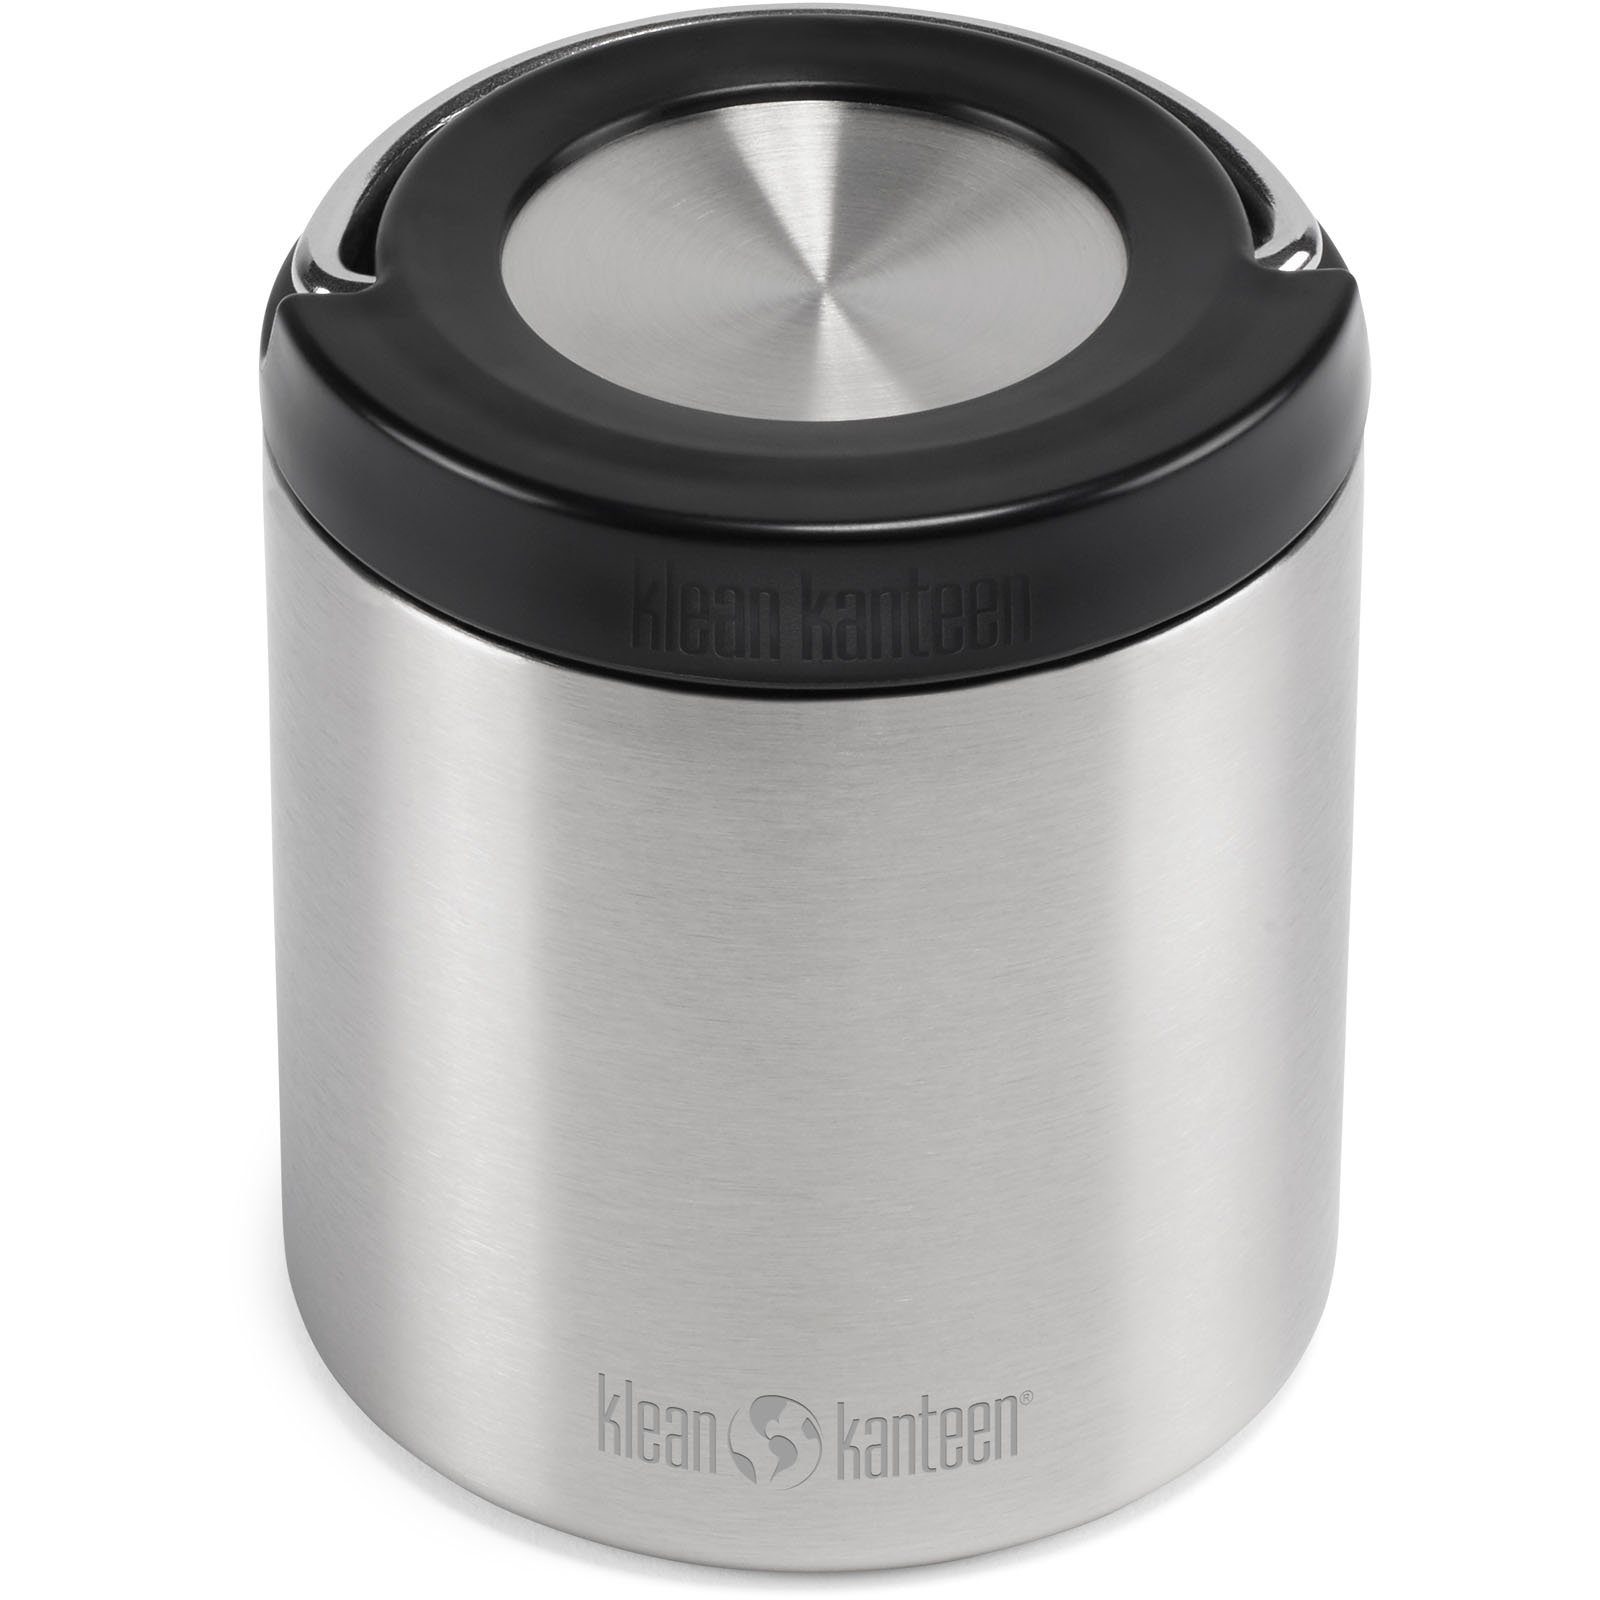 Thermo, Behälter Canister Food Kanteen Isolierbehälter Thermobehälter Essen Edelstahl, Klean Polypropylen, TK Container Silikon,